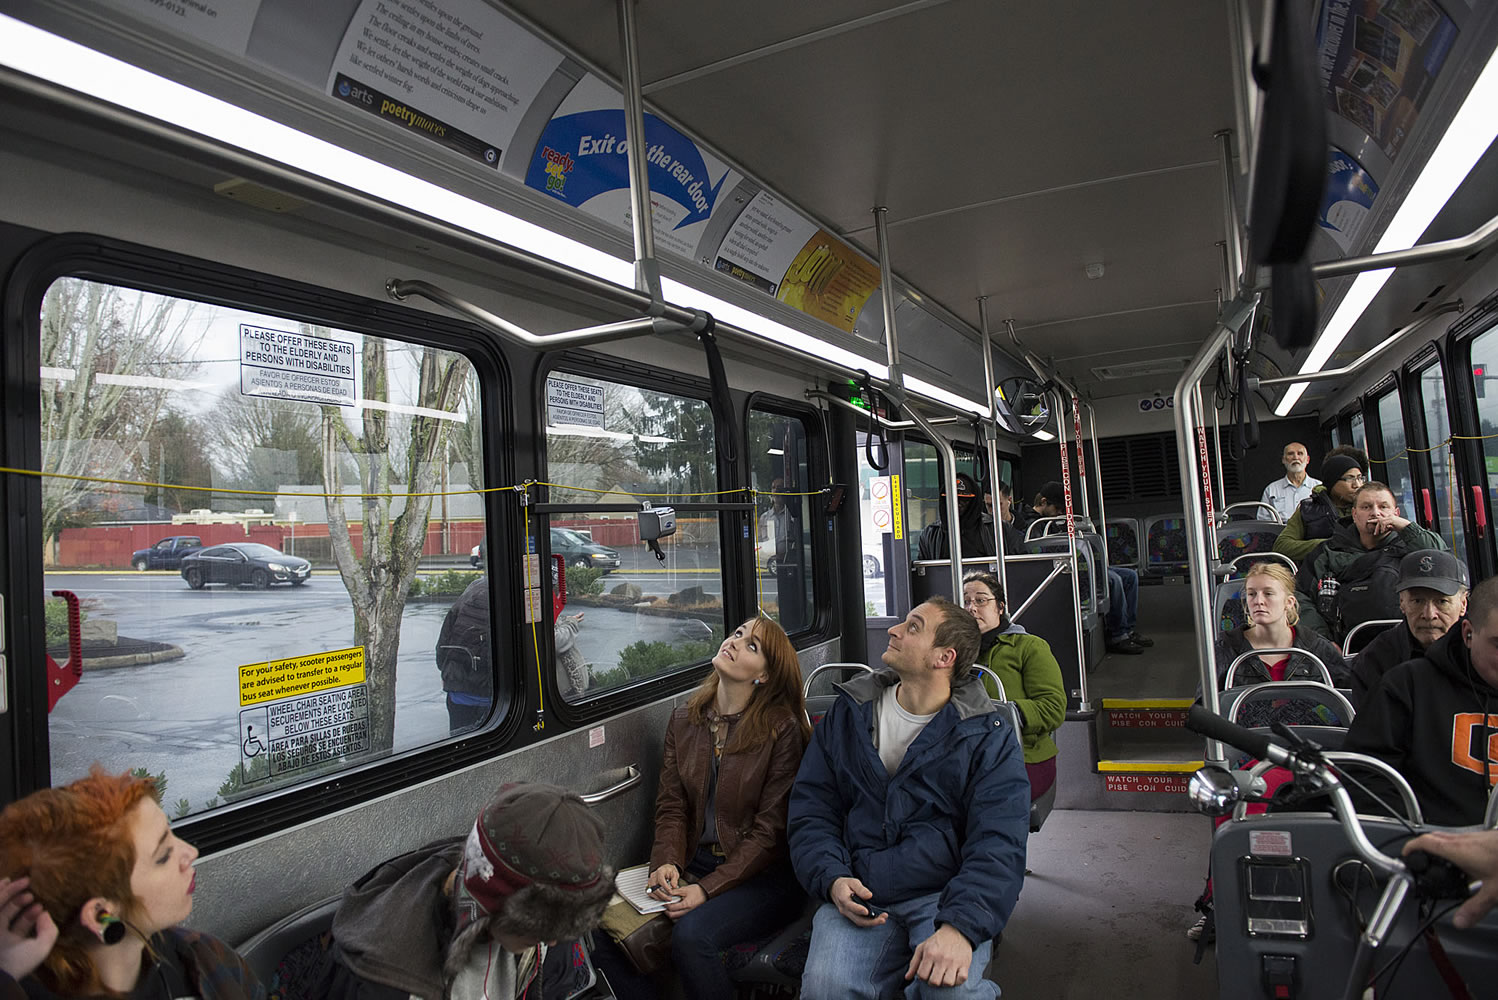 Poet Erin Iwata of Ridgefield, center in brown jacket, reads some moving poetry wtih Michael Atton of Vancouver aboard the no. 4 bus along Fourth Plain Boulevard on Dec. 14.